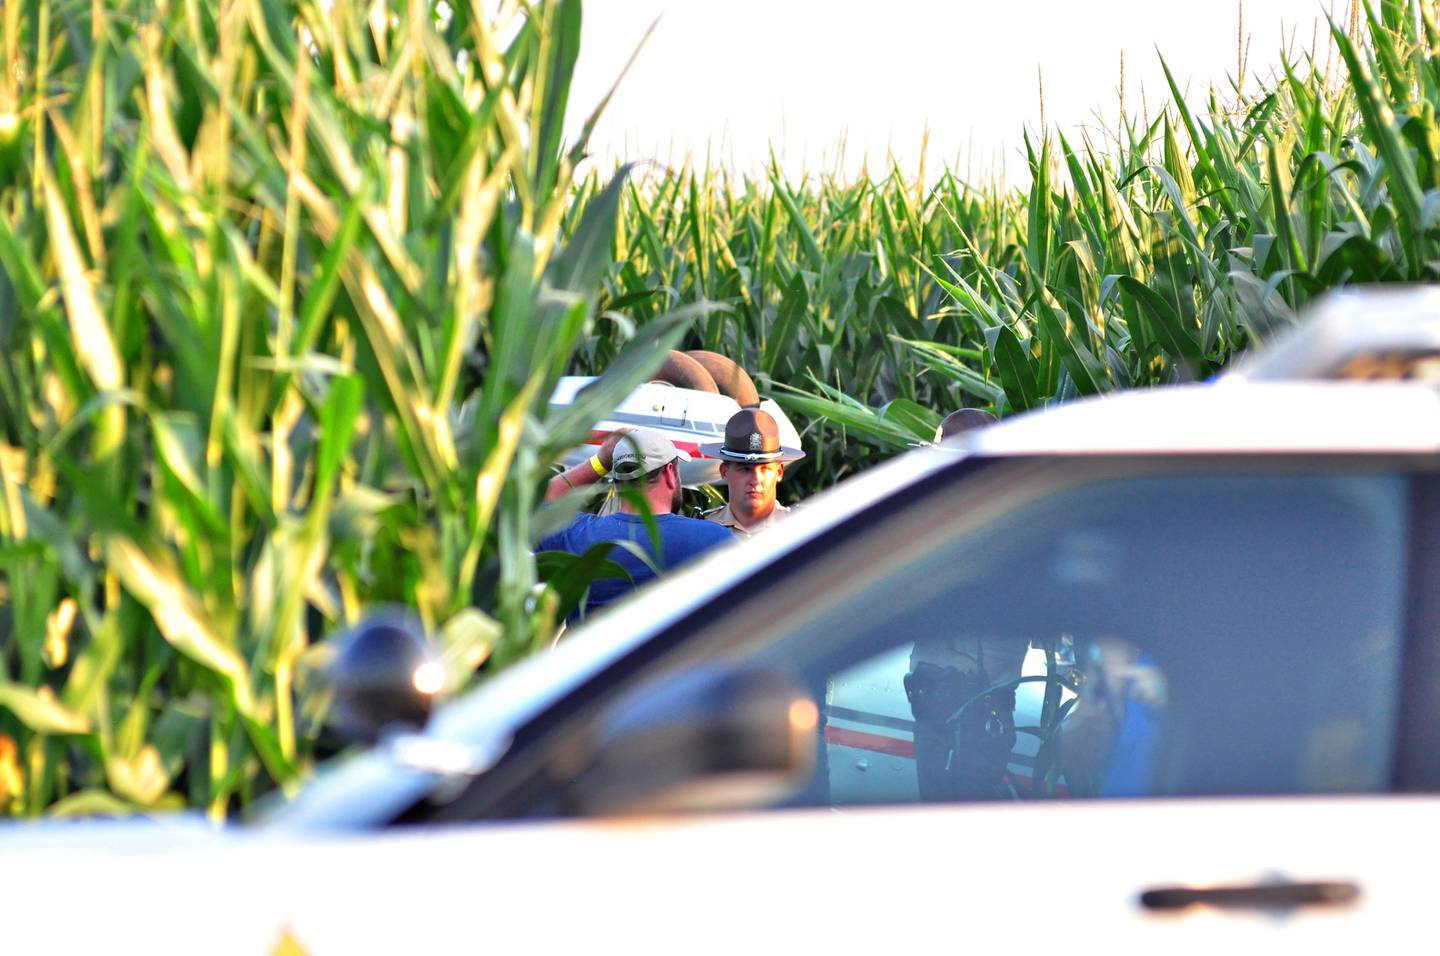 The planes landing gear can be seen upside down after landing and flipping in a corn field Saturday evening.